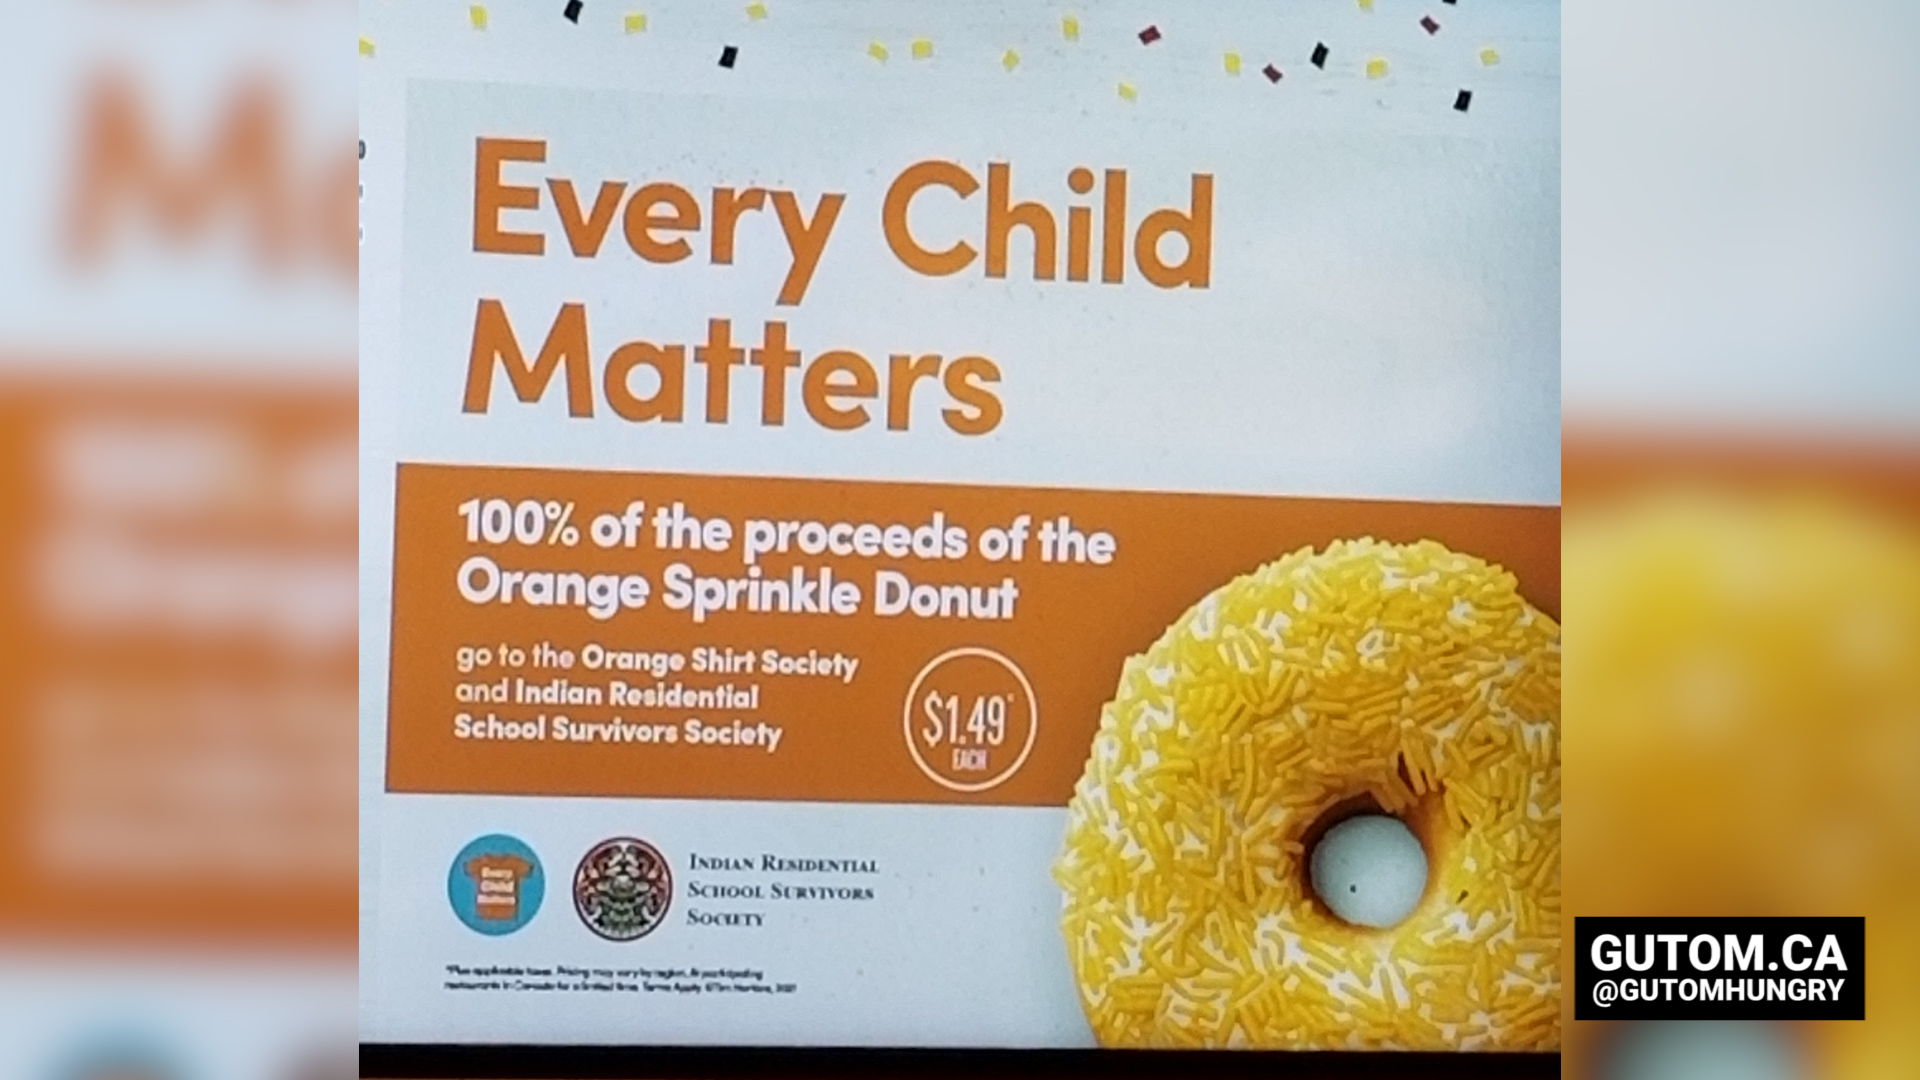 Tim Hortons Orange Sprinkle Donut campaign returns tomorrow, Sept. 30, with  100% of all fundraising donut sales being donated to Indigenous charities